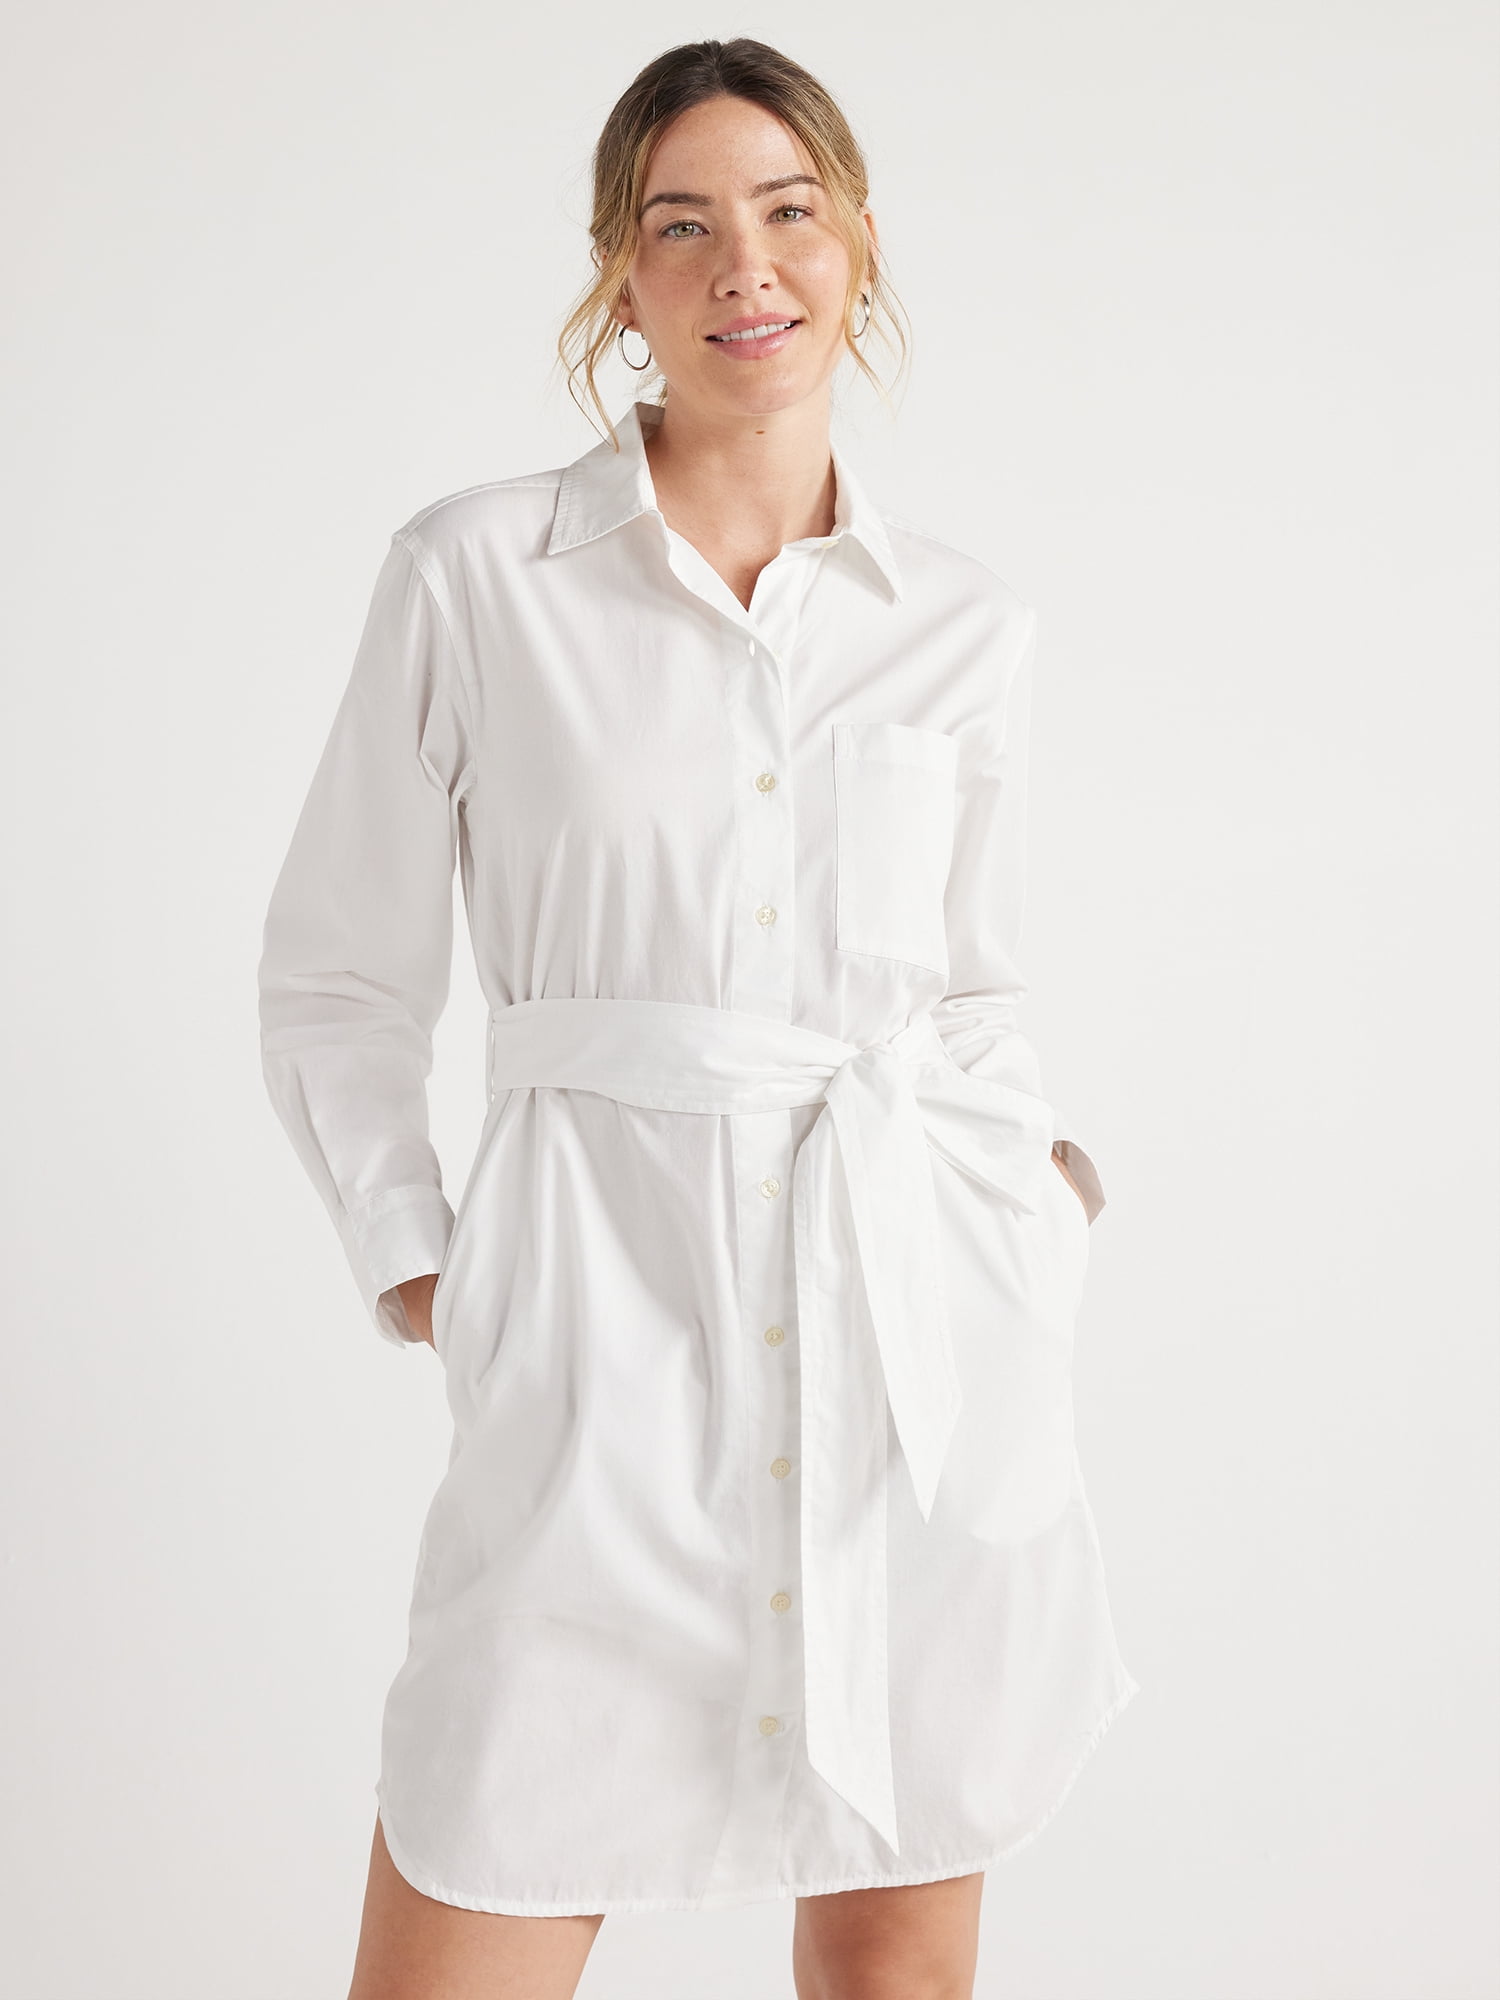 Free Assembly Women’s Cotton Belted Shirtdress with Long Sleeves, Sizes ...